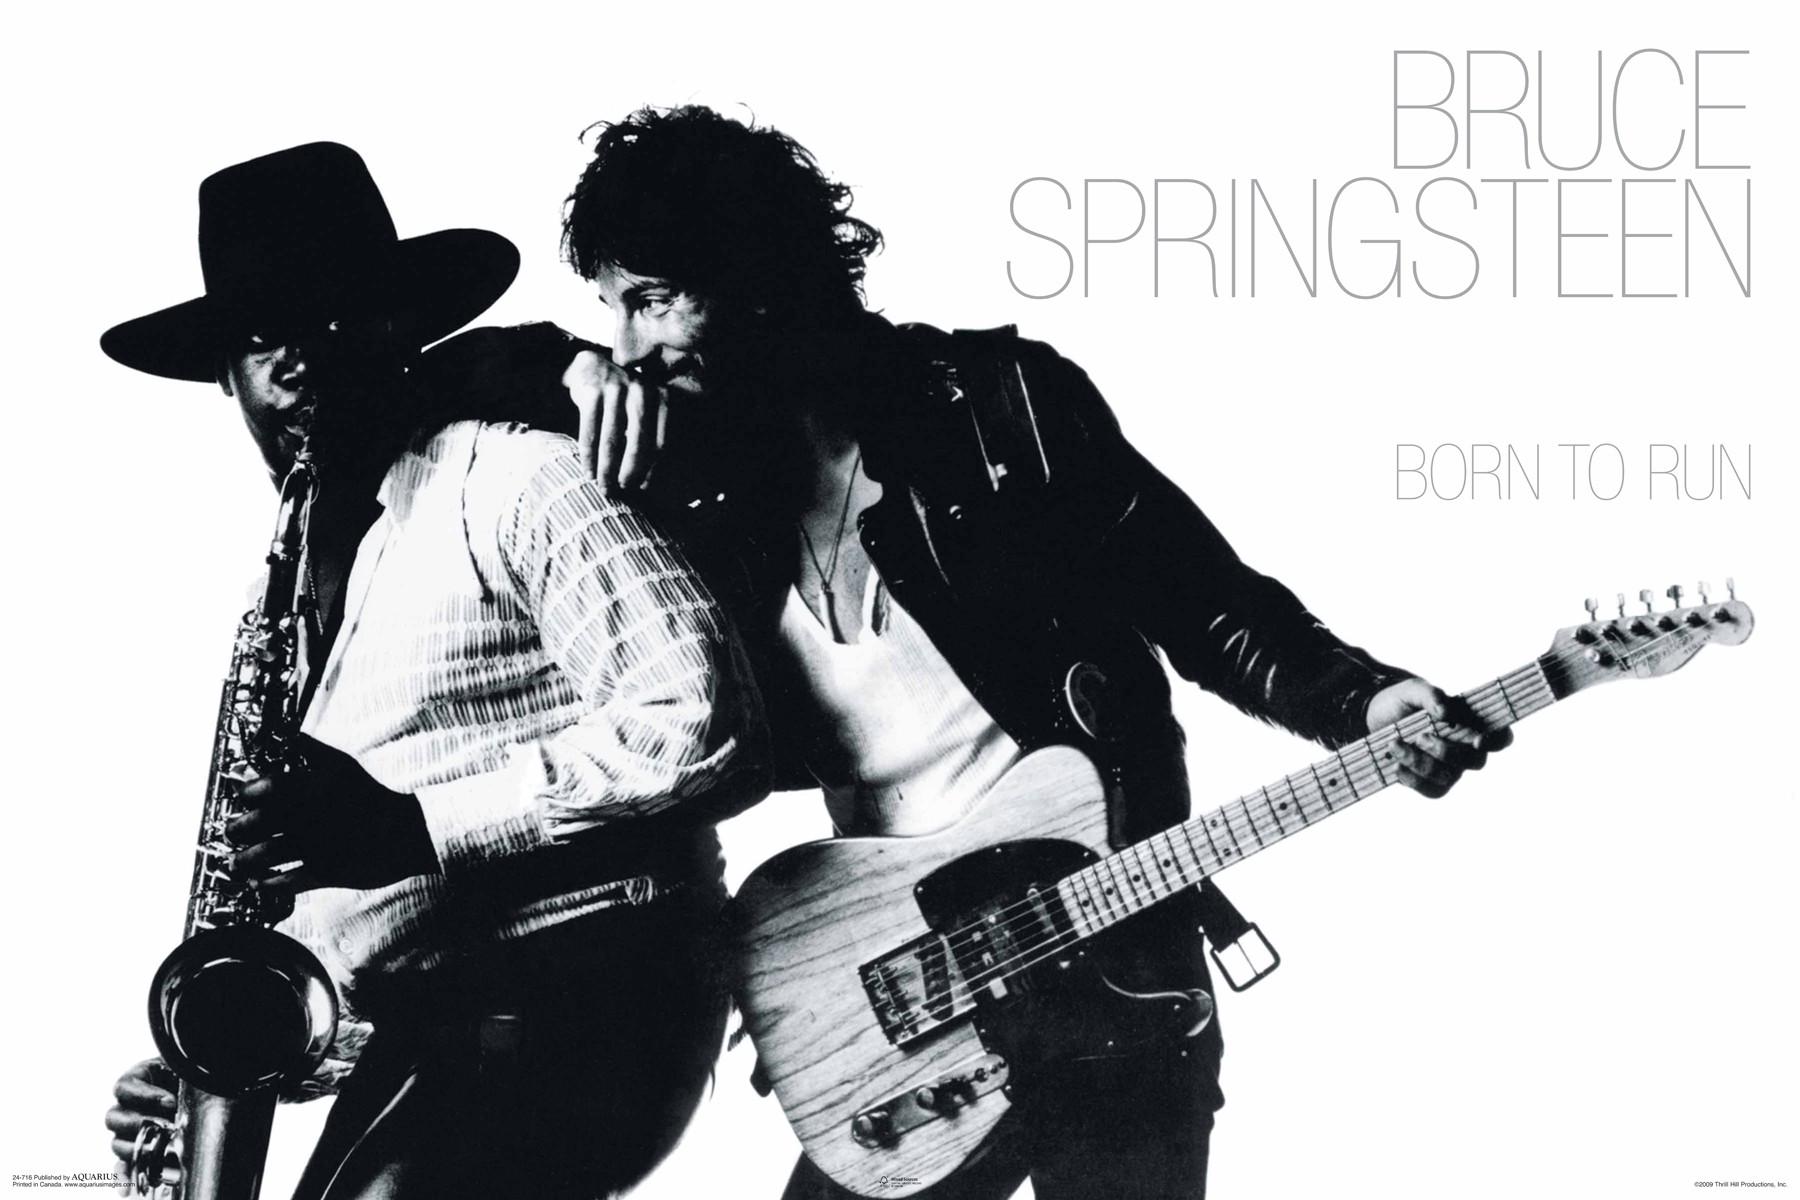 Happy 40th birthday, Born To Run! Thanks for a spectacular collection of songs Bruce 